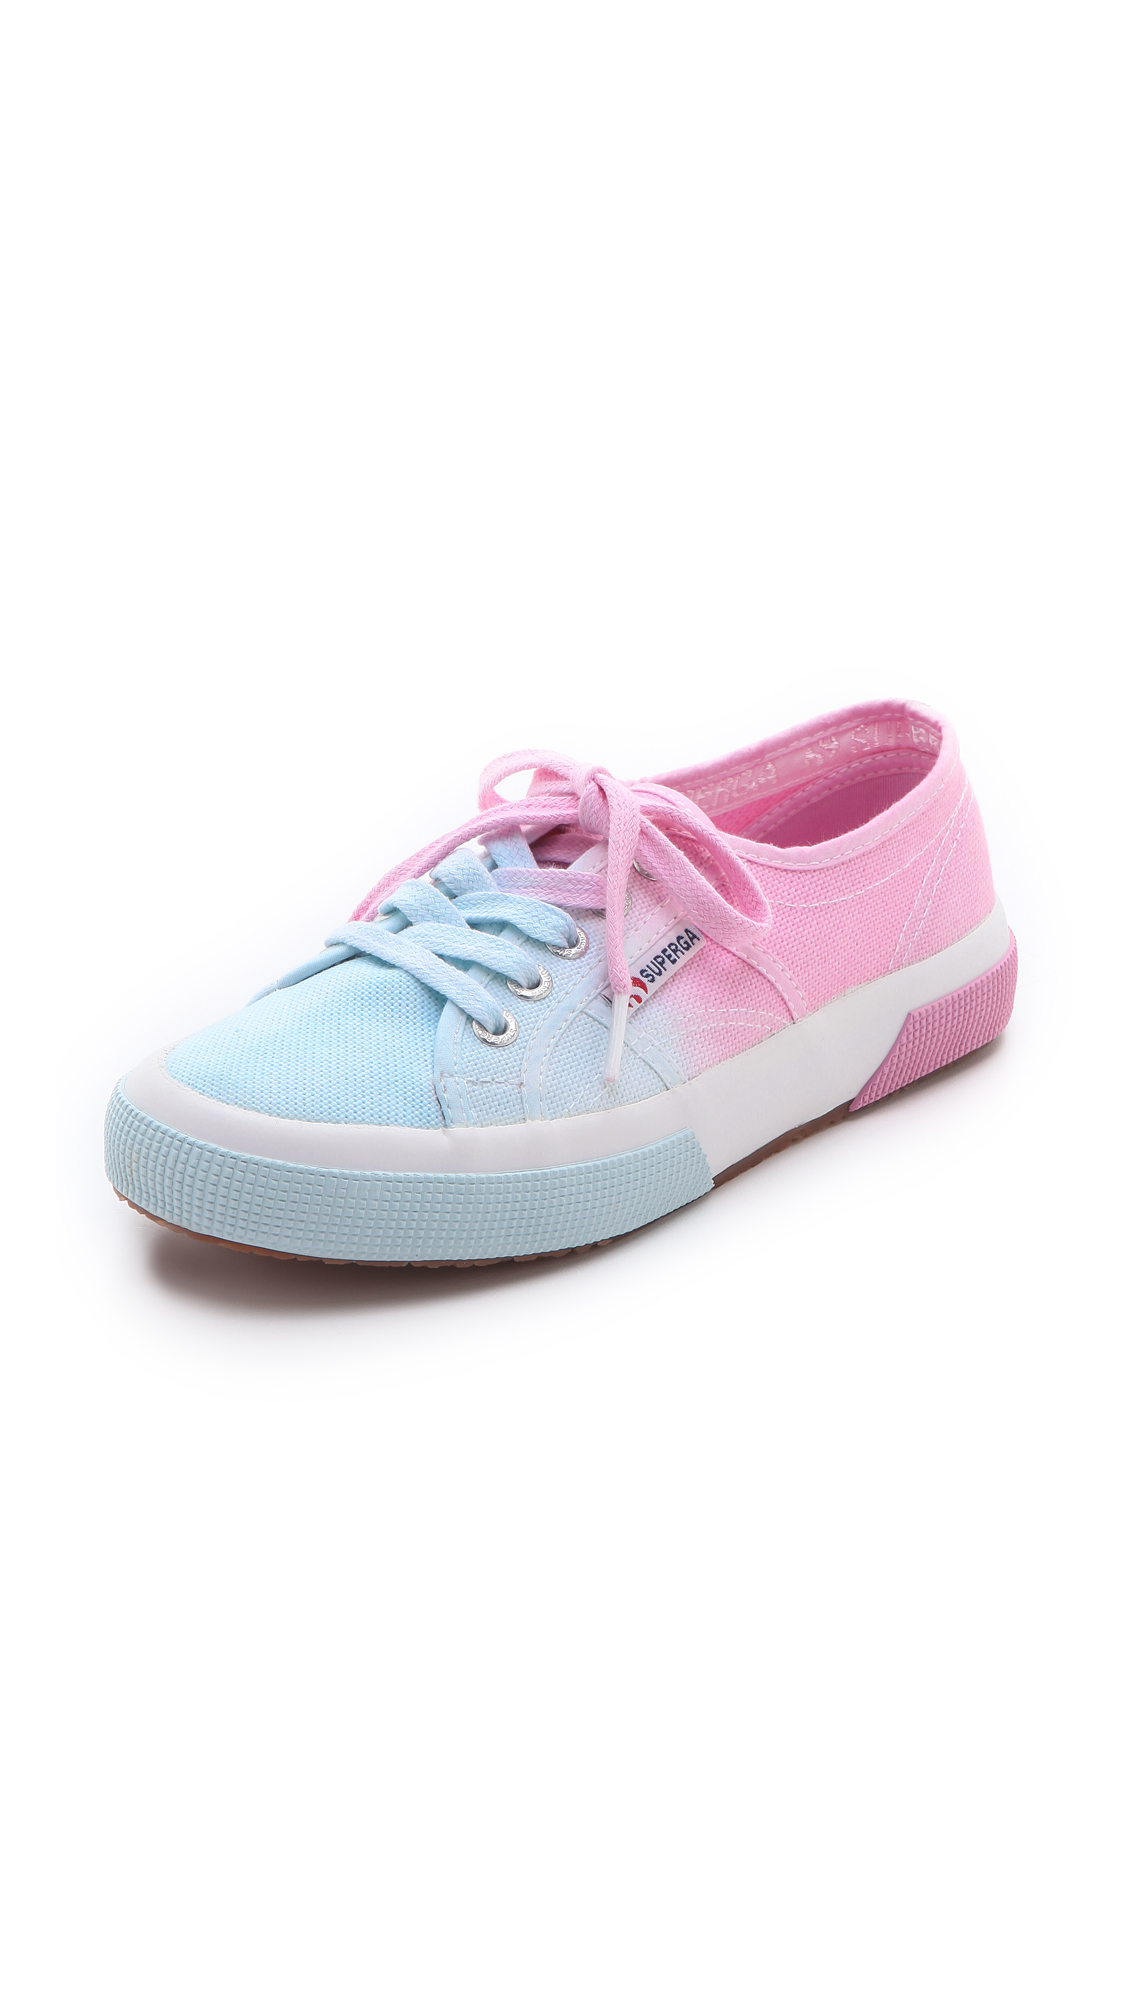 Superga Ombre Sneakers in Rose 